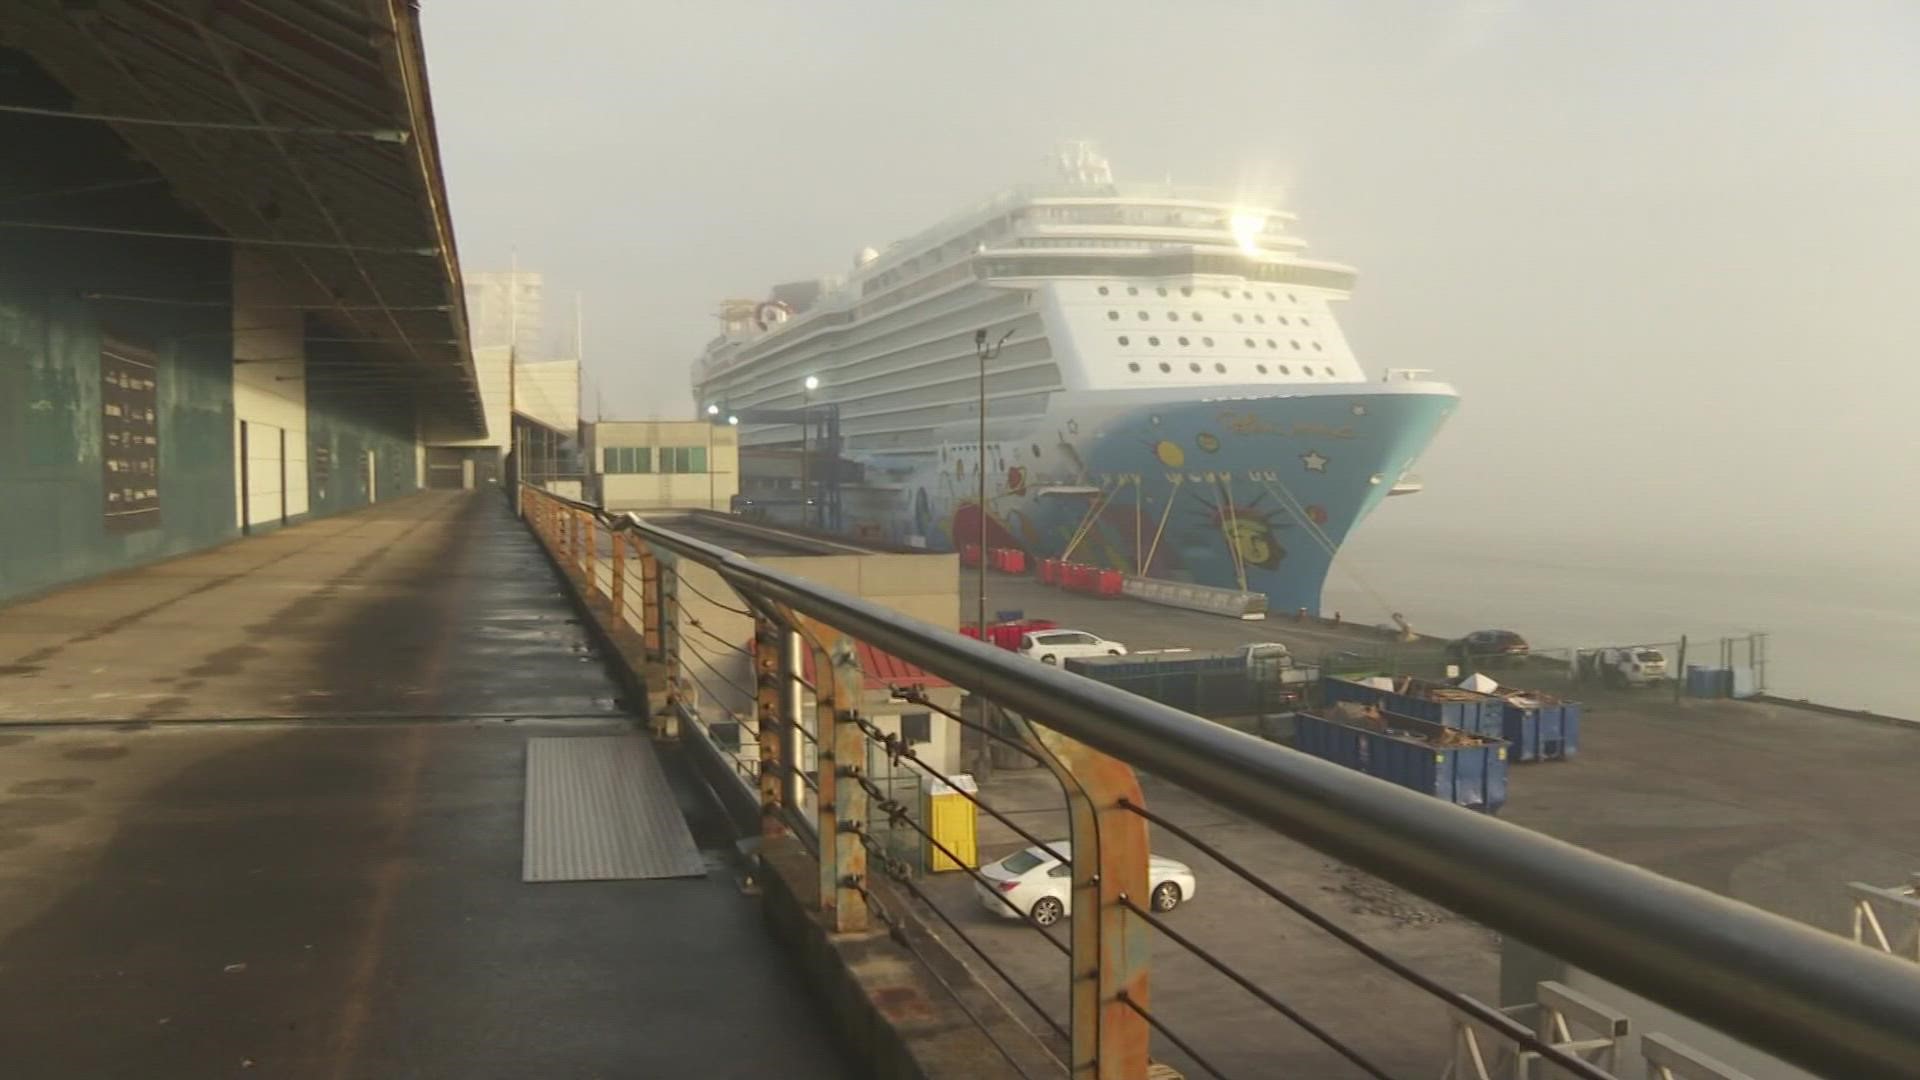 The customers will have new restrictions on their cruise that left Sunday night